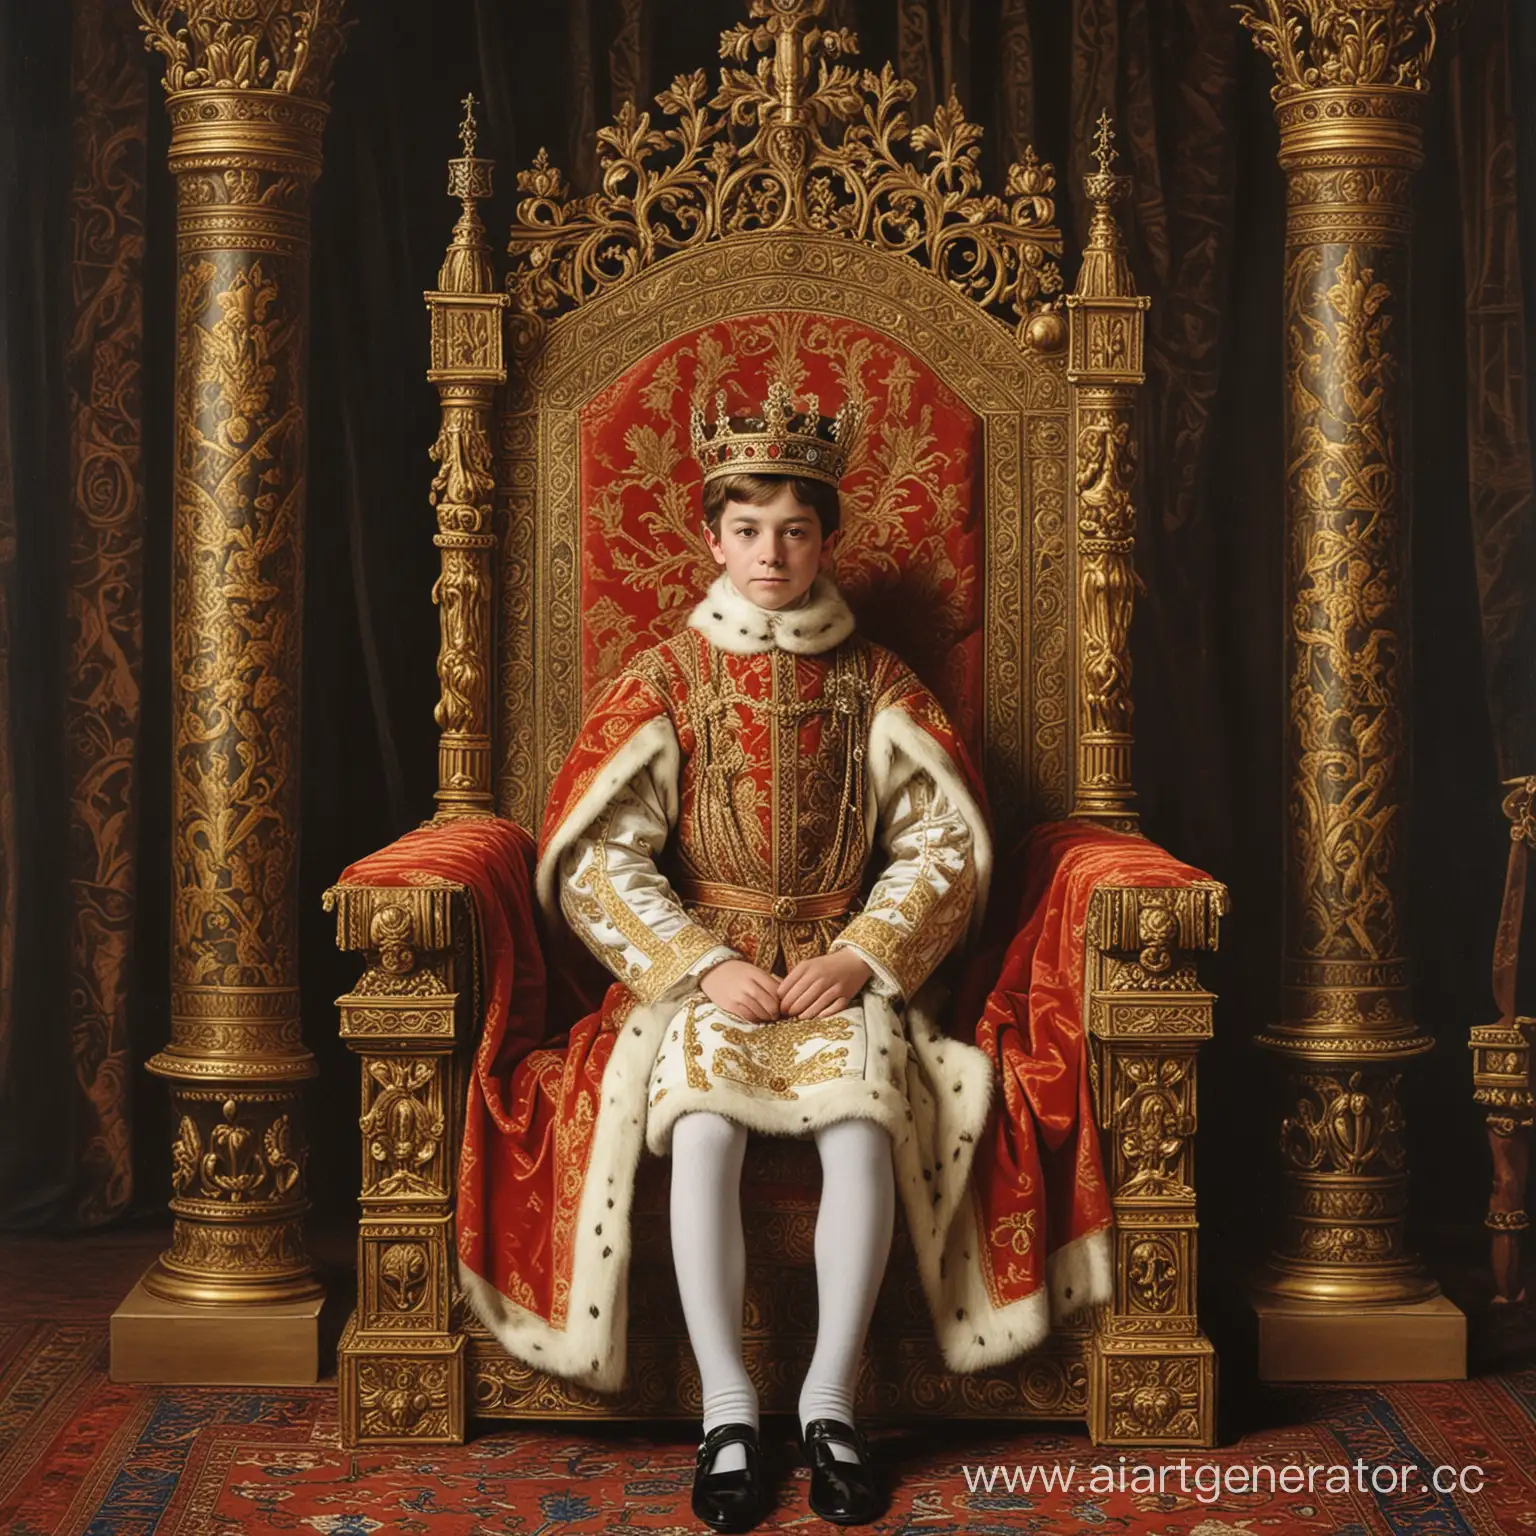 Young-King-Gabriel-of-England-on-Throne-in-16th-Century-Throne-Room